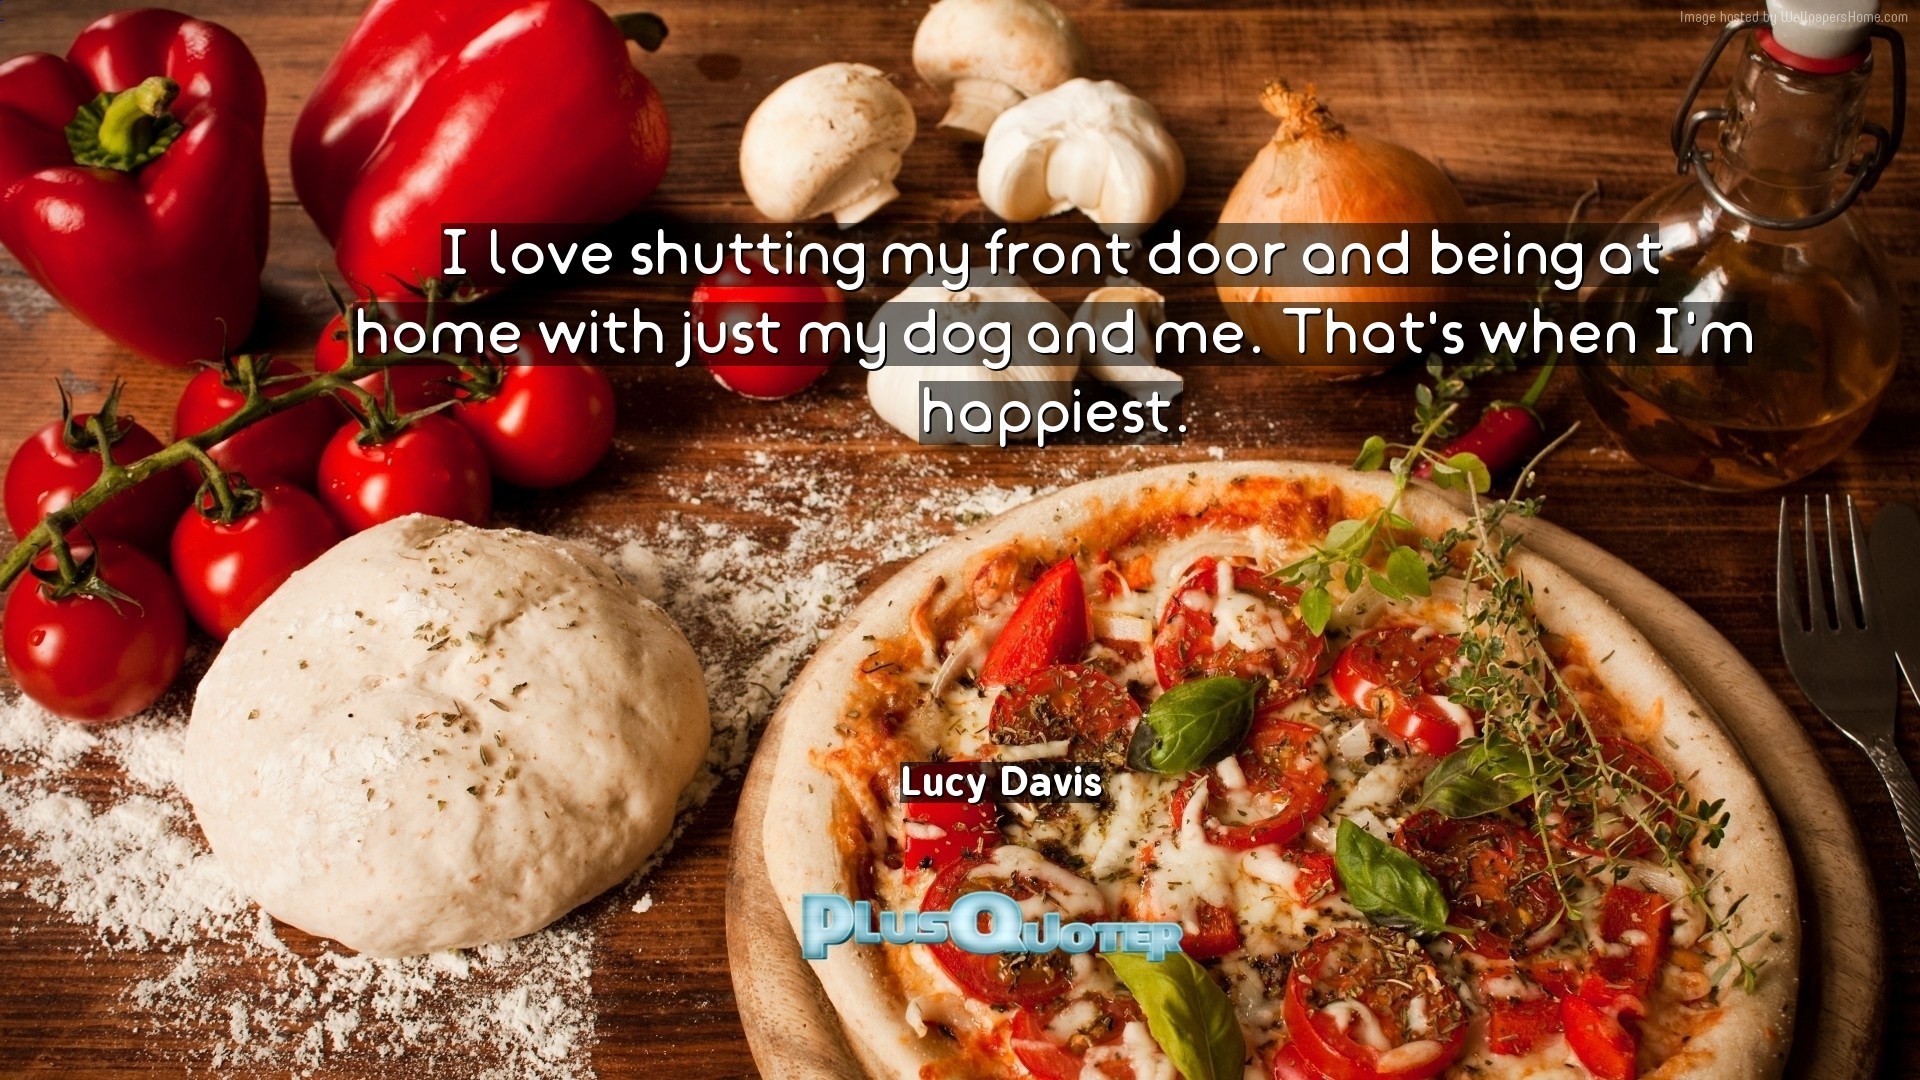 1920x1080 Download Wallpaper with inspirational Quotes- "I love shutting my front  door and being at